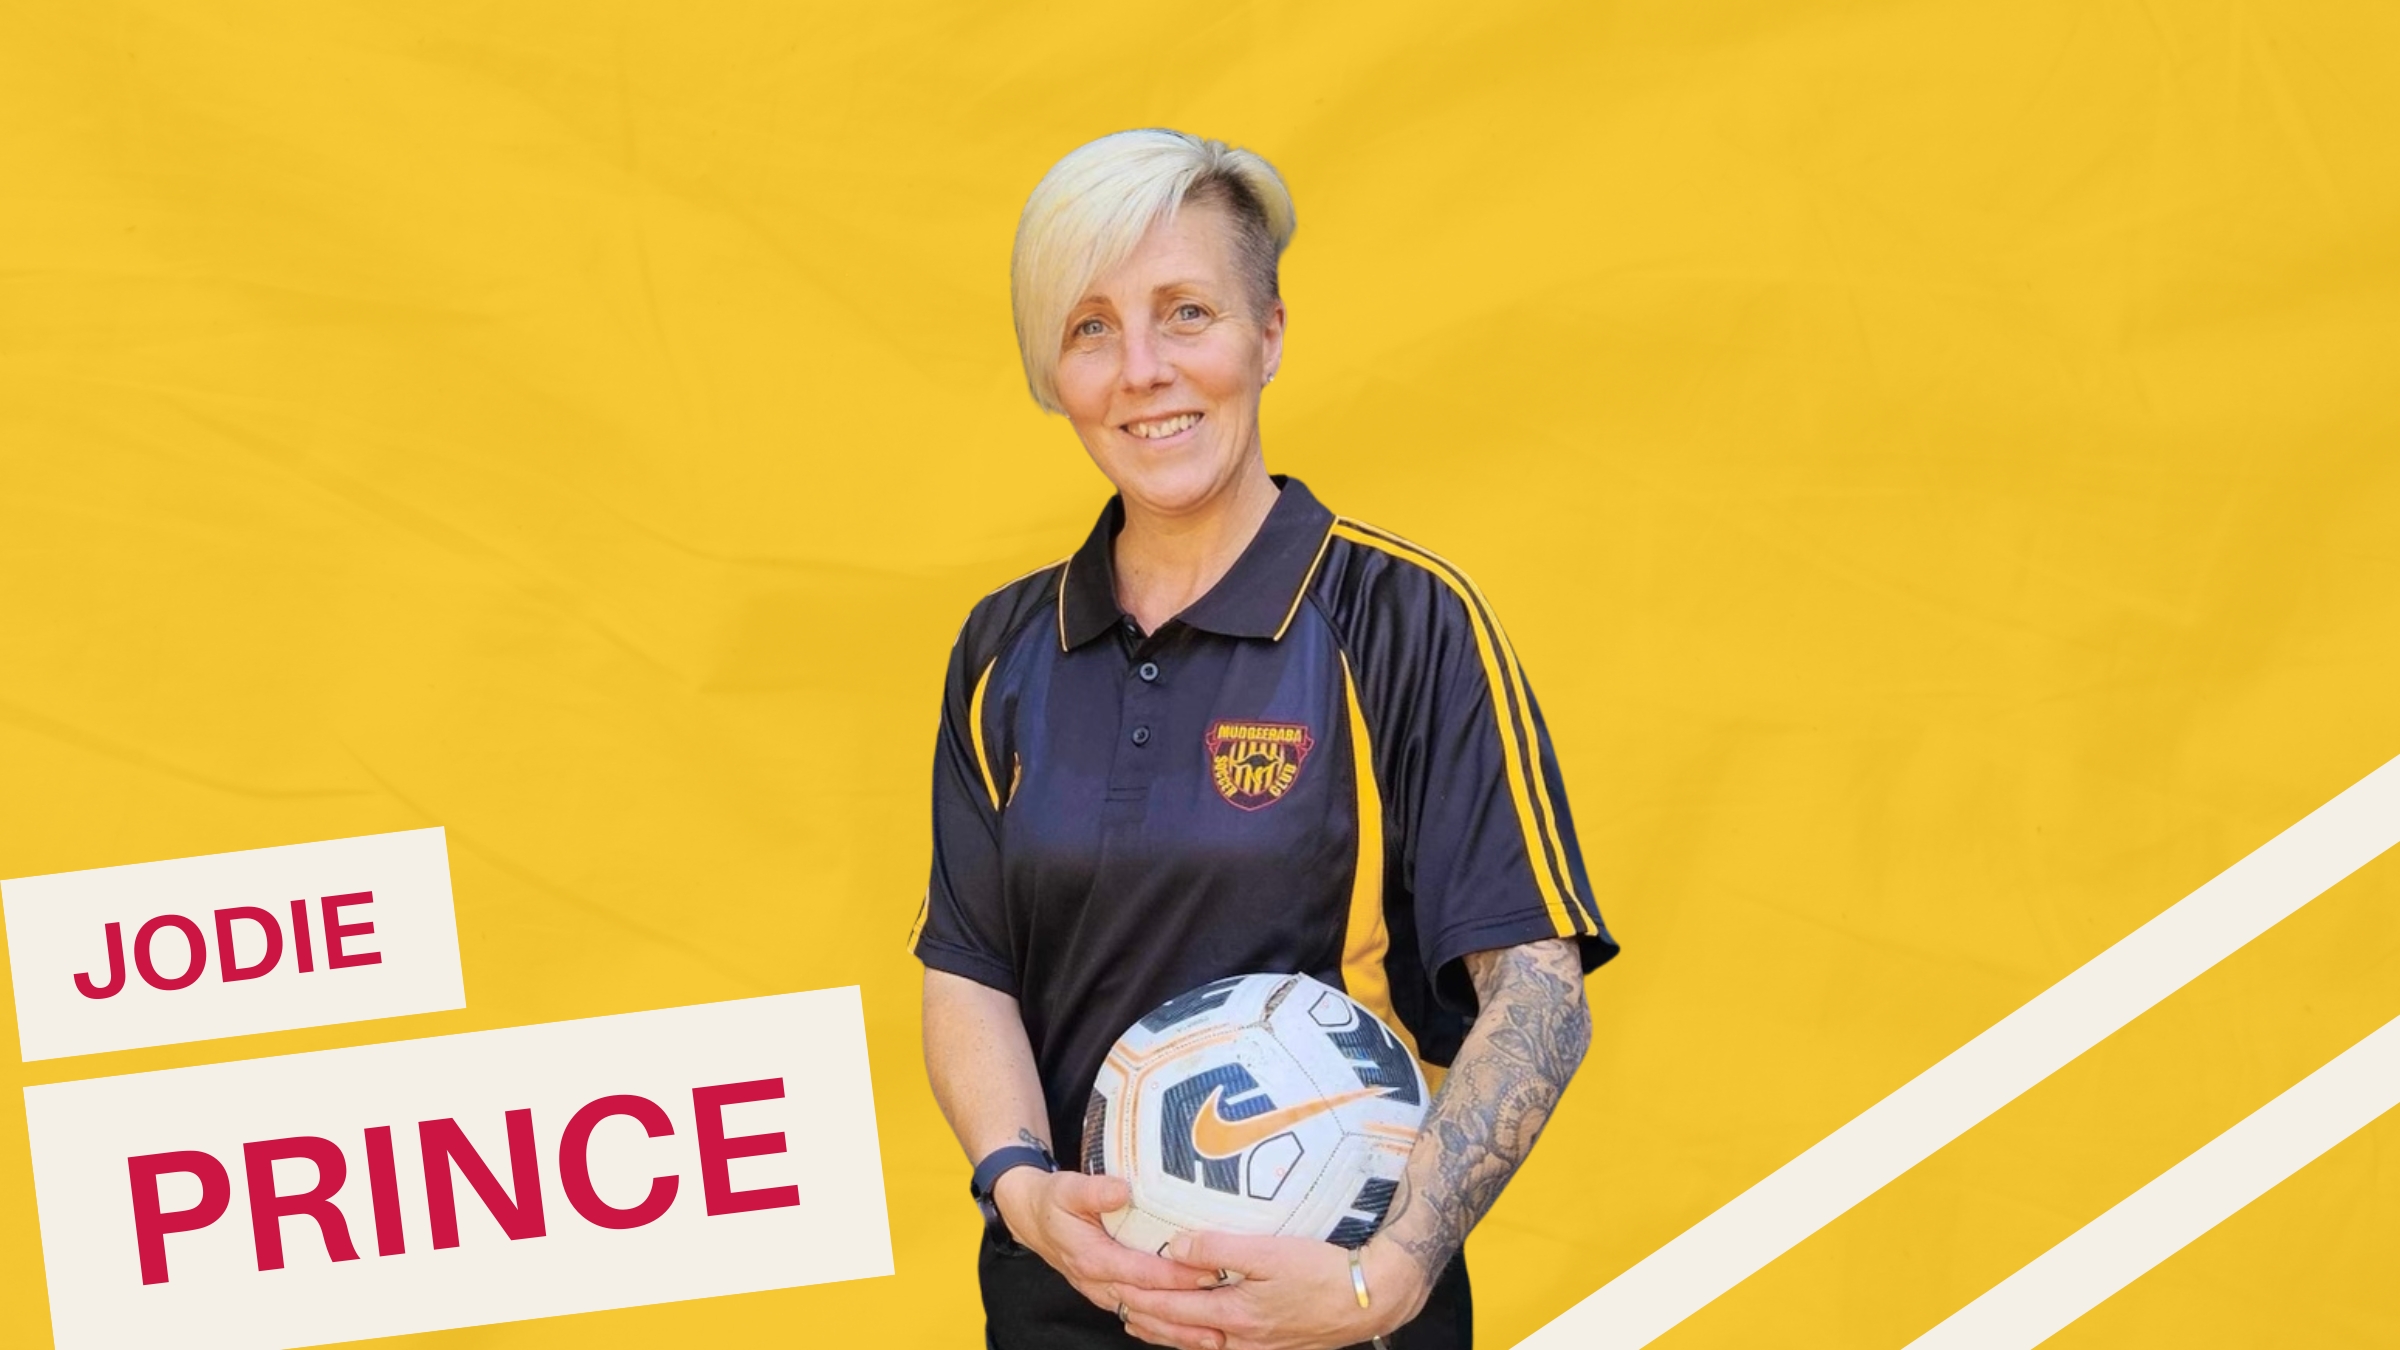 Introducing our 2024 Senior Women’s Coach Jodie Prince